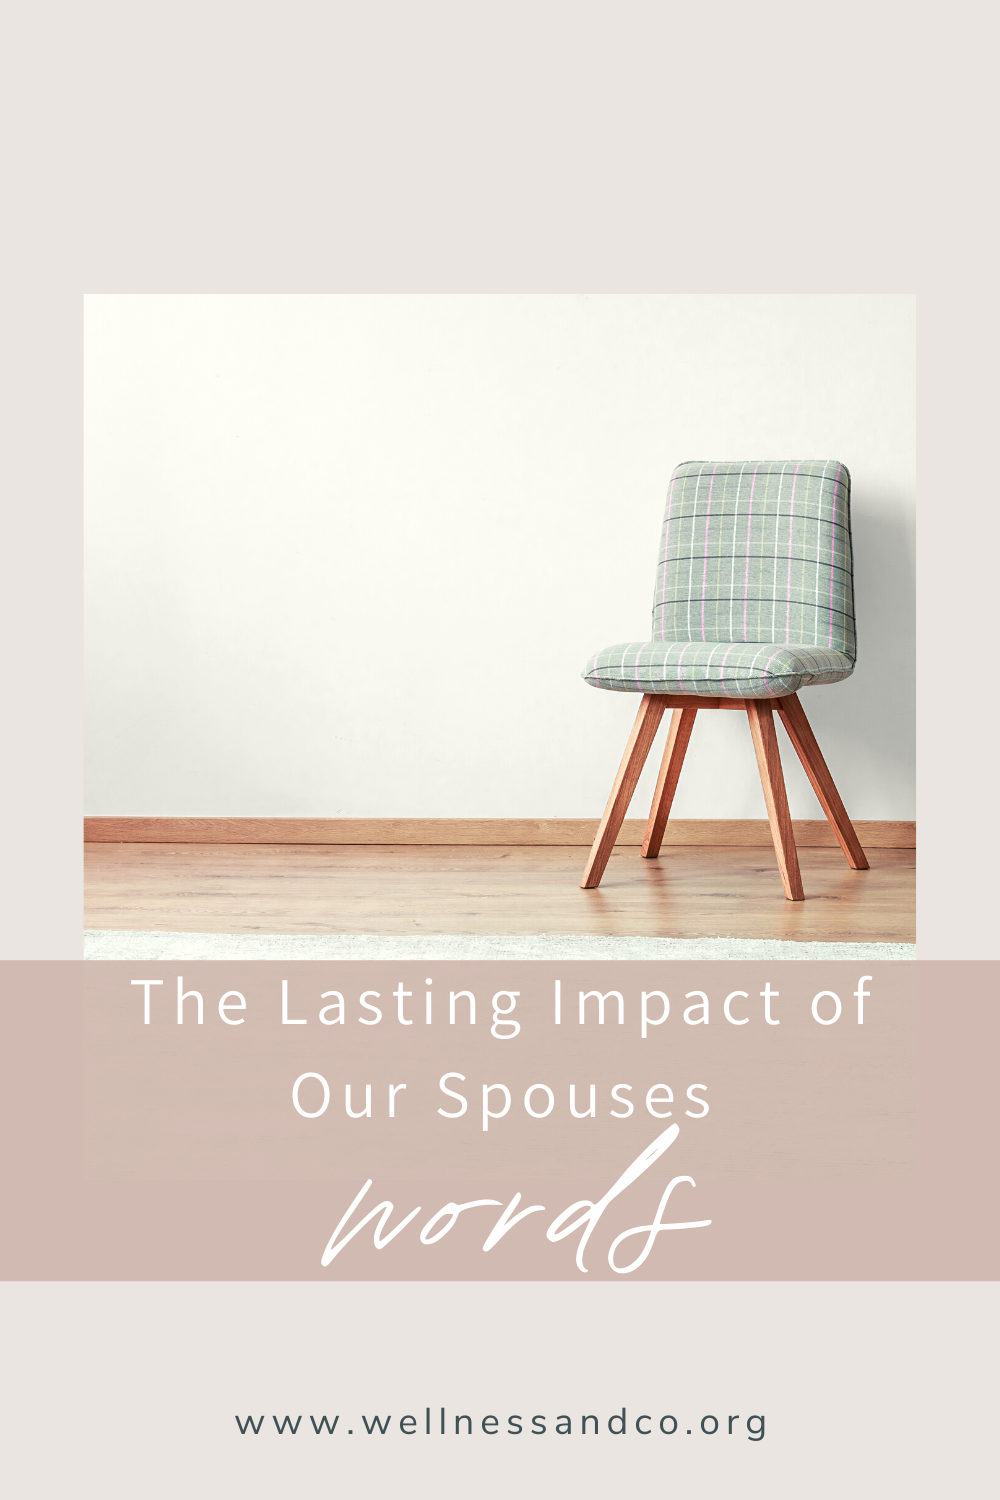 The Lasting Impact of Our Spouses Words | Have you ever felt frustrated or hurt from what your spouse has said? Do they regularly show anger toward you? Do you feel verbally abused by them? You are not alone. This poem targets the wounds some couples hear every day.